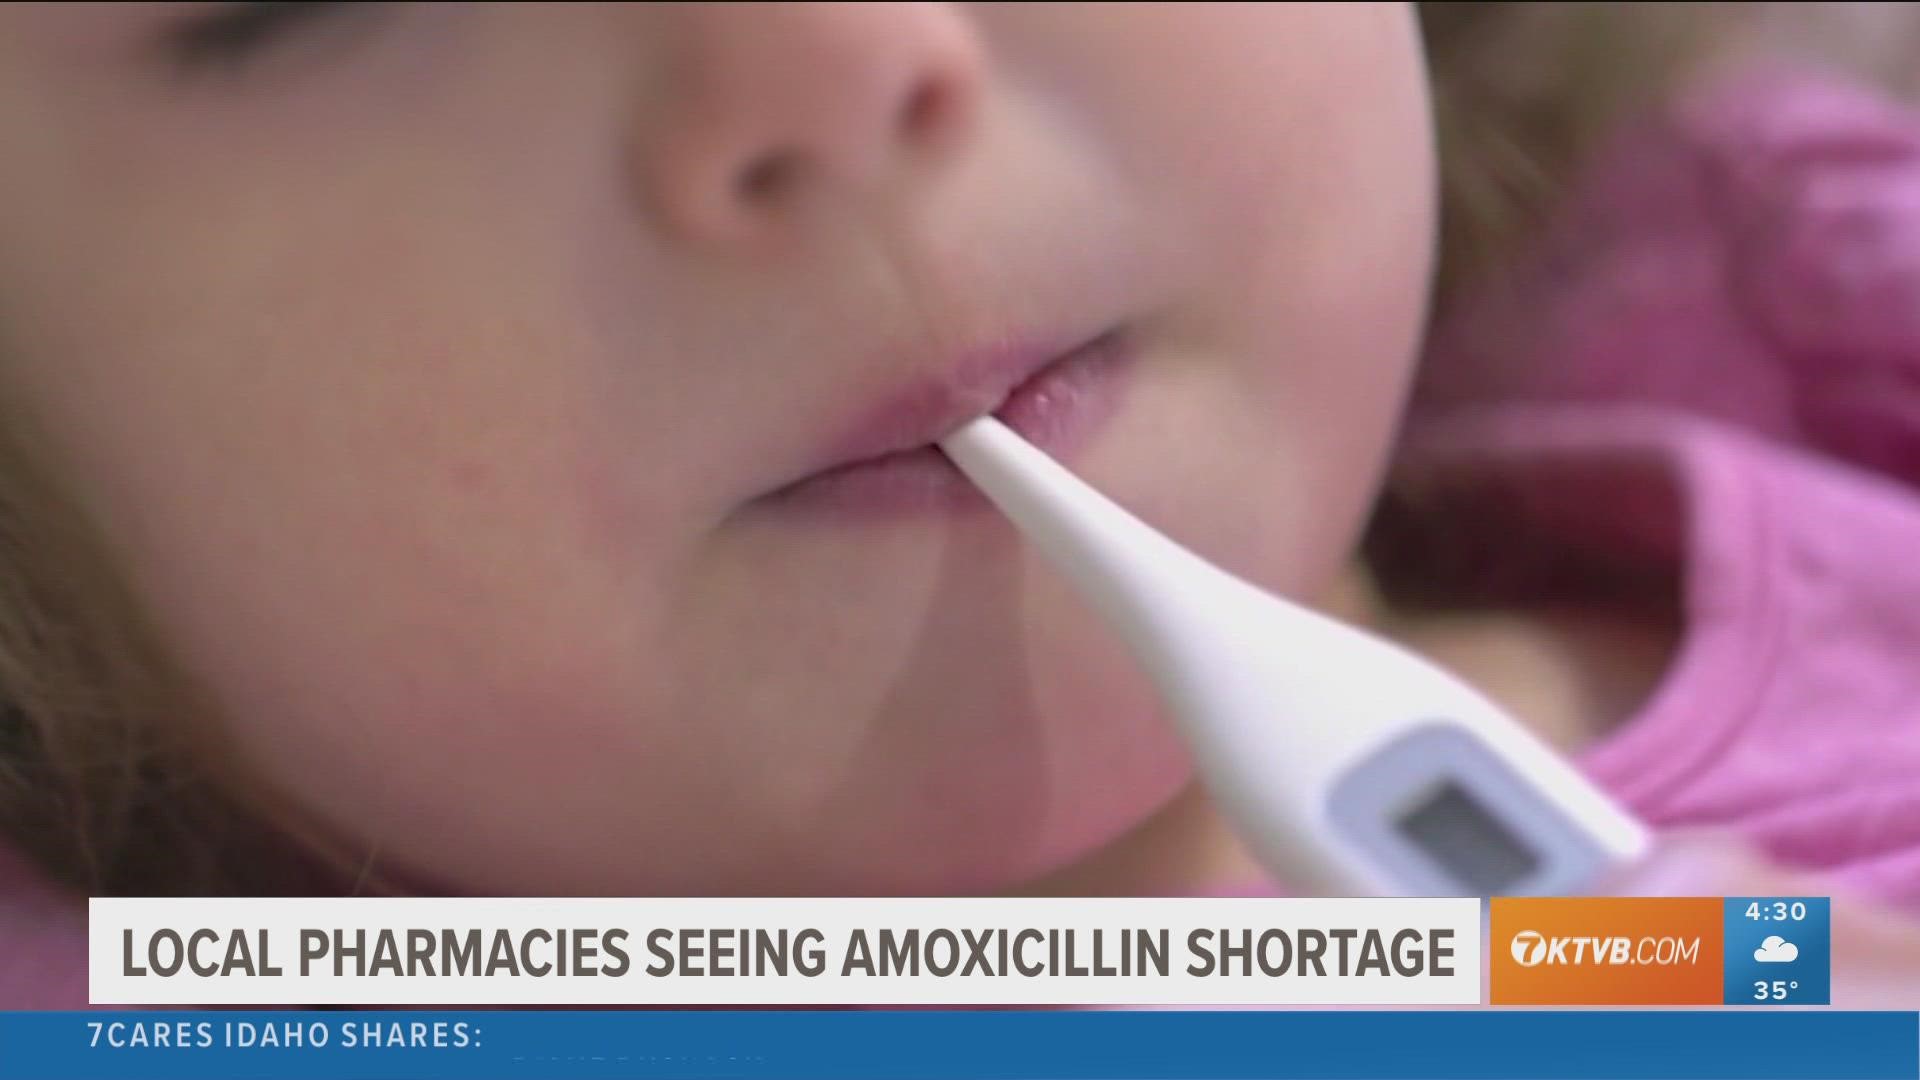 The FDA says the shortage of Amoxicillin is due to increased demand and more sick kids.